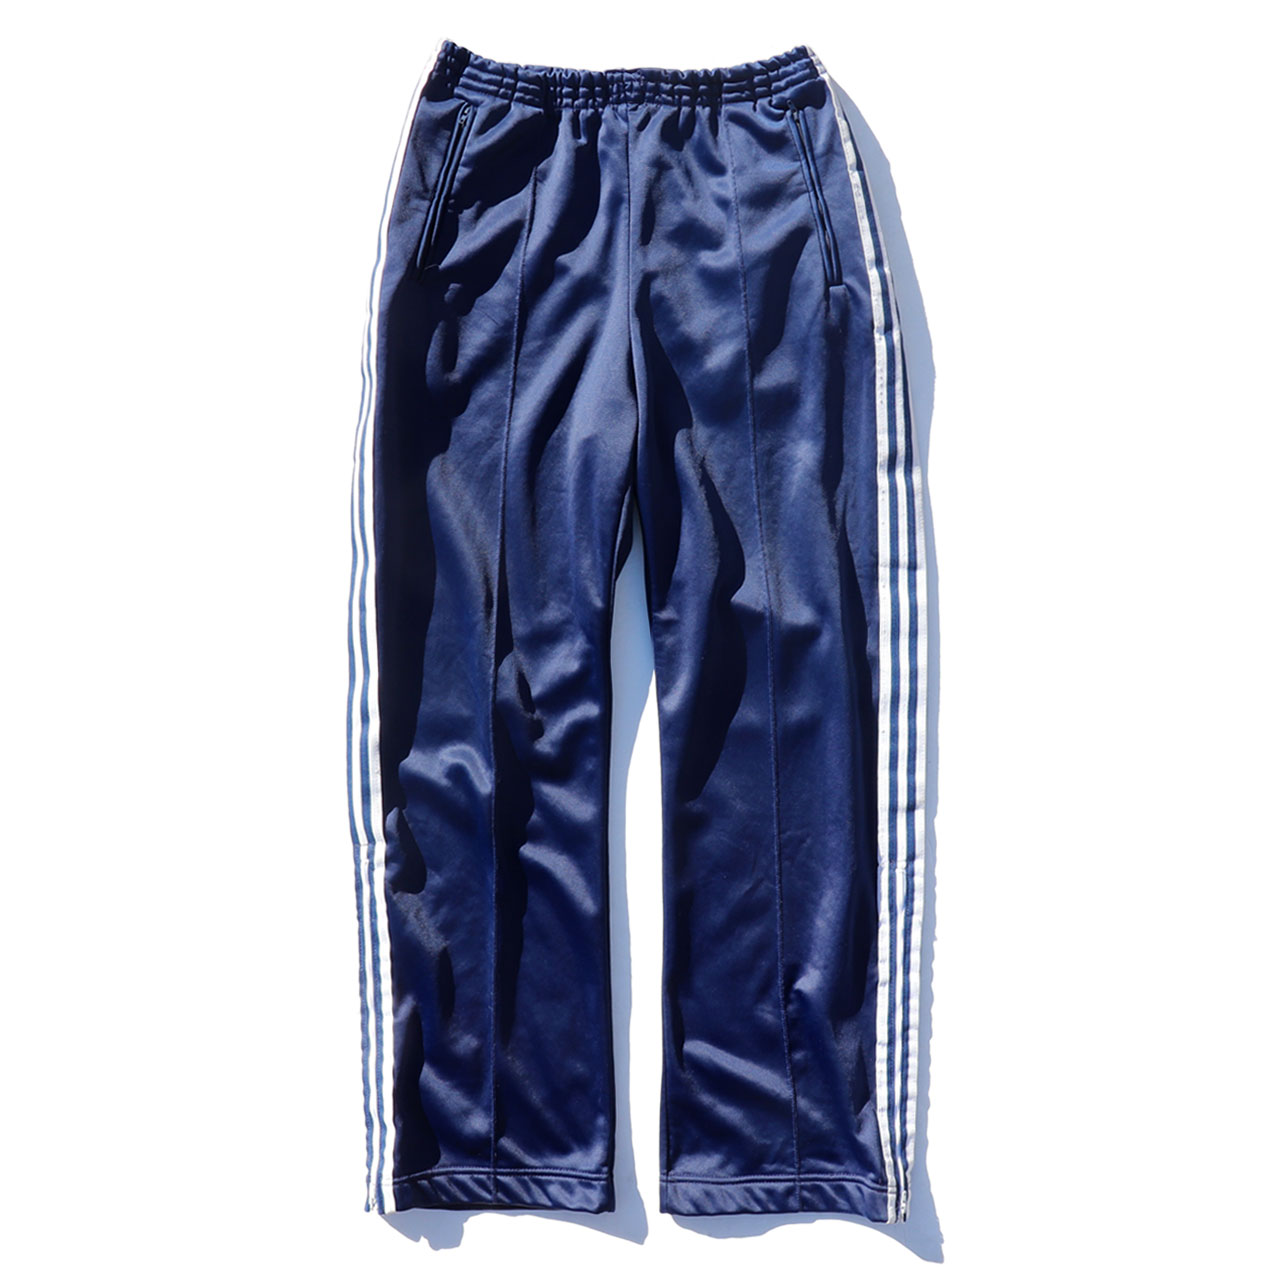 POST JUNK / 80's ADIDAS ATP Track Pants Made In U.S.A. [L]